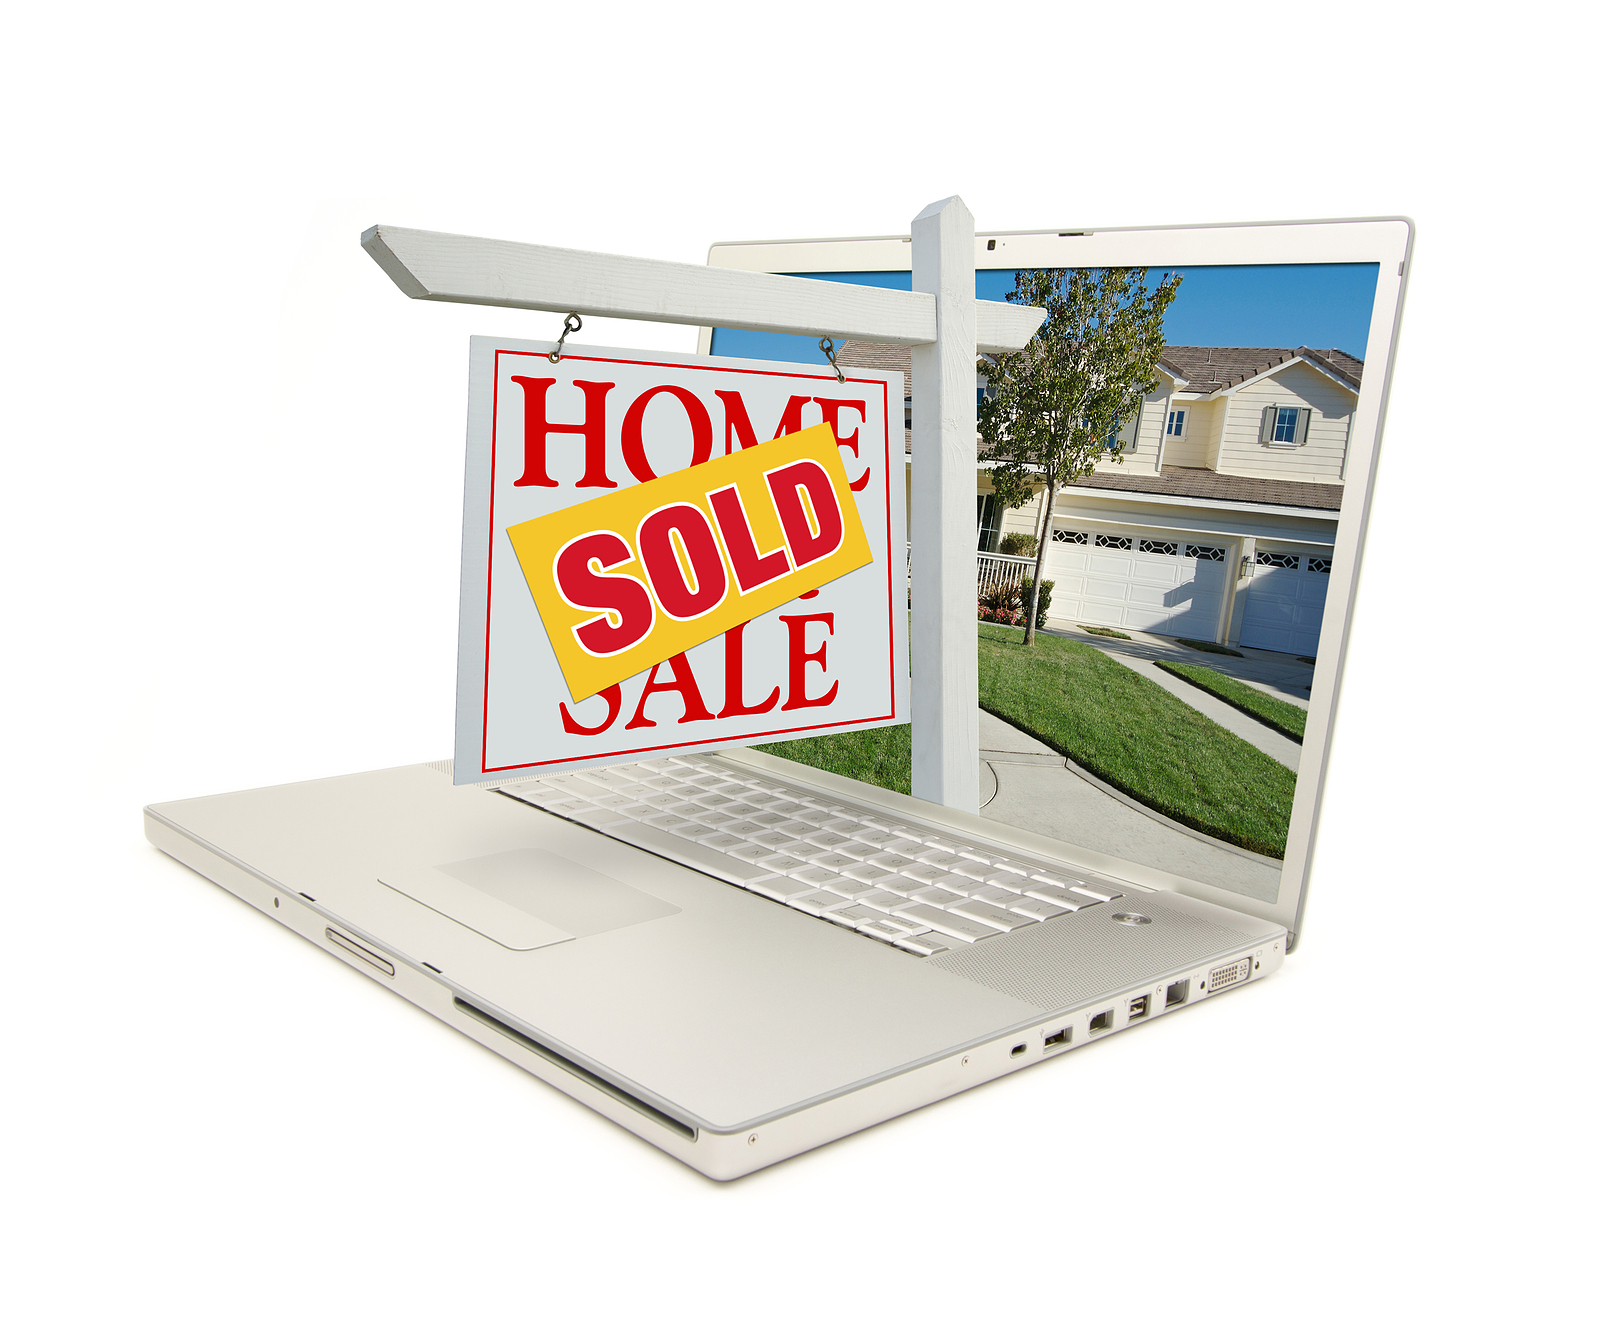 Red Sold Home For Sale Sign on Laptop Isolated on a White Background.